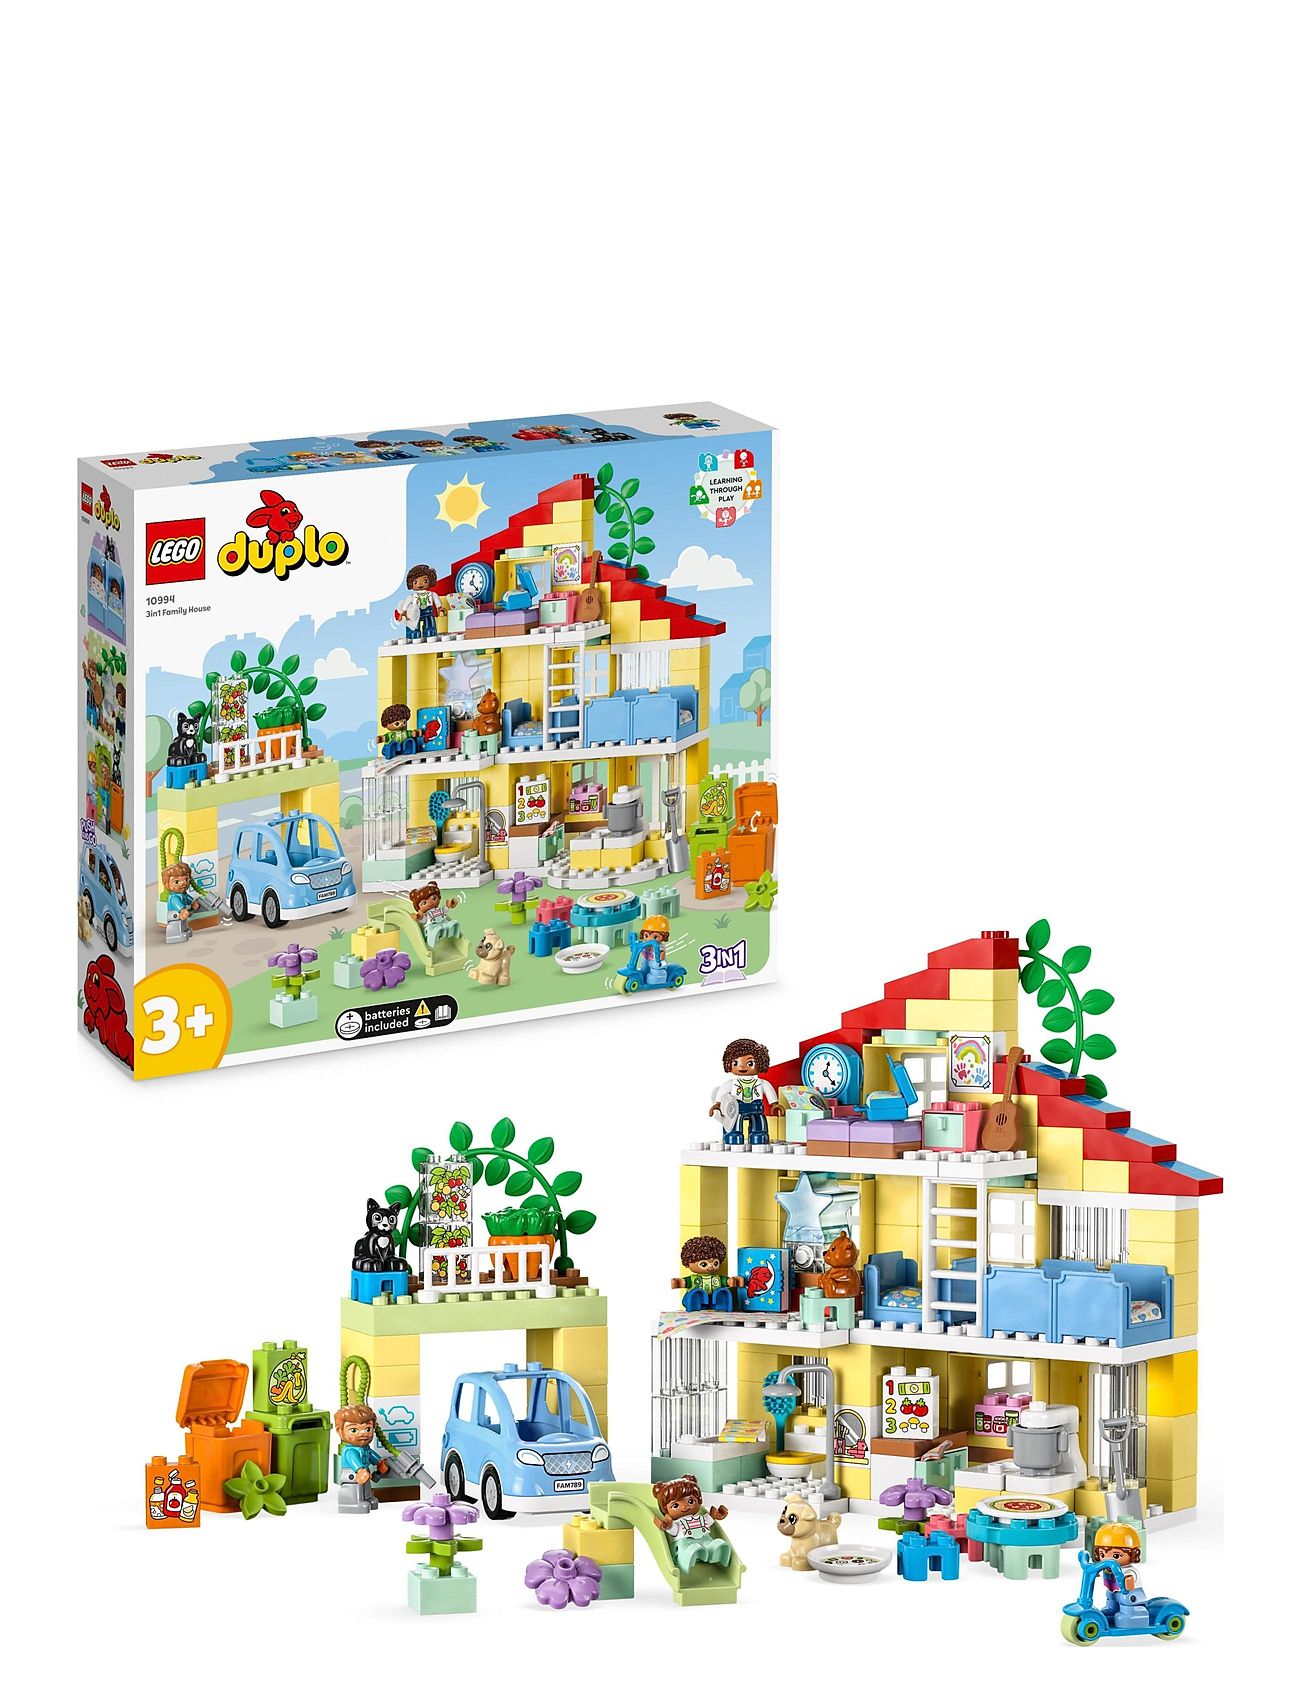 3In1 Family House Toy For Toddlers Aged 3+ Toys Lego Toys Lego duplo Multi/patterned LEGO